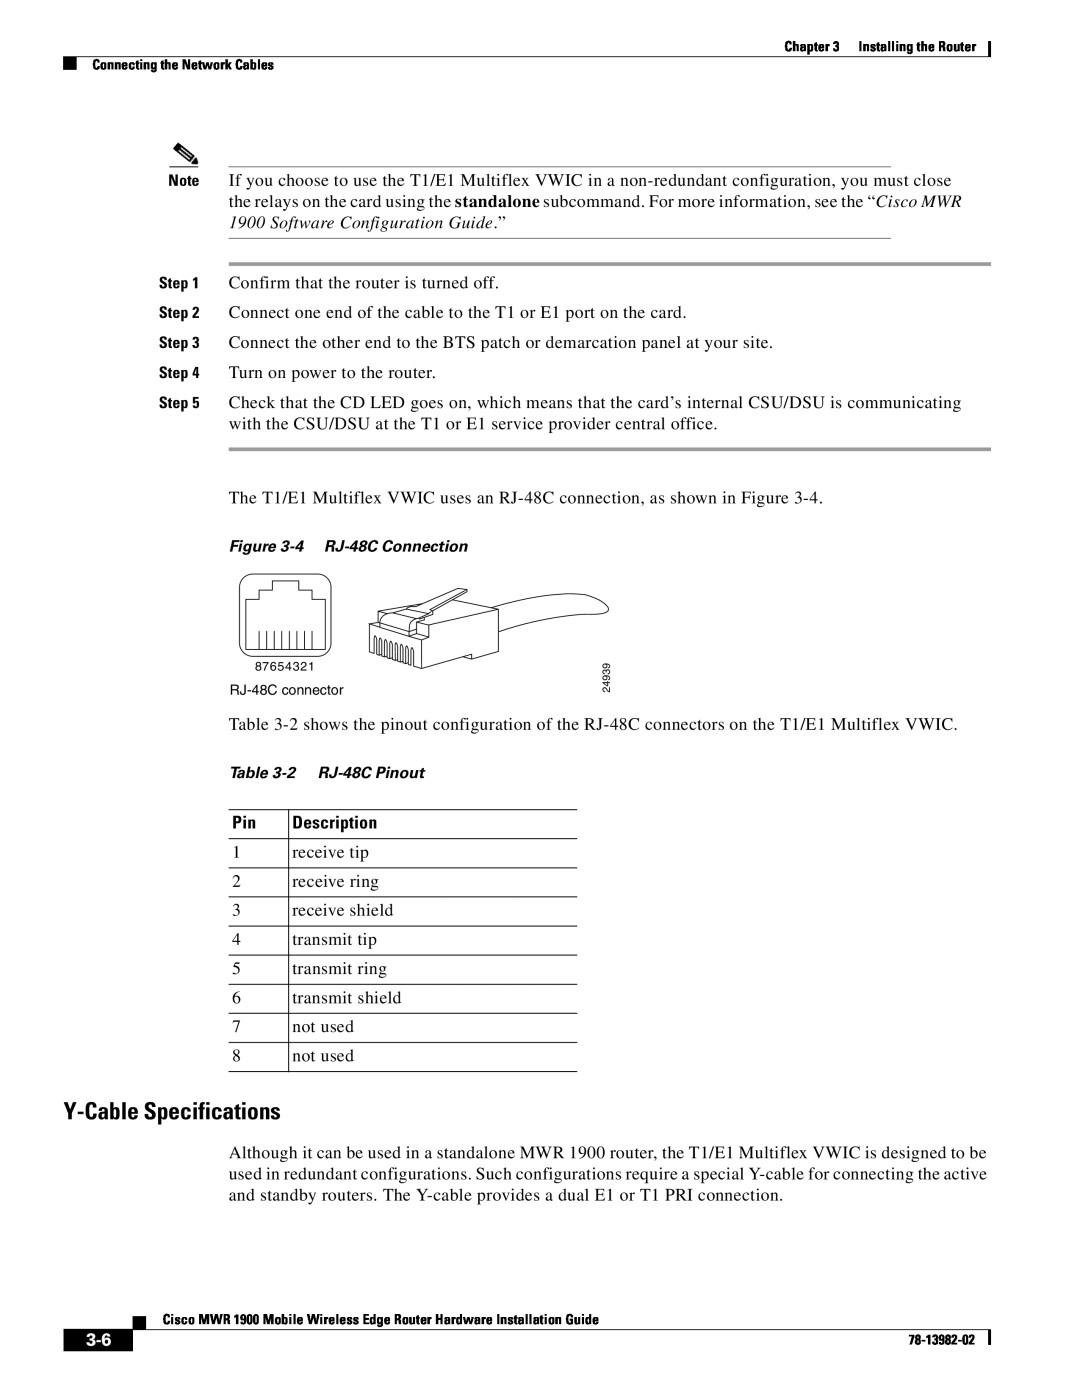 Cisco Systems MWR 1900 manual Y-Cable Specifications, 4 RJ-48C Connection, 2 RJ-48C Pinout 